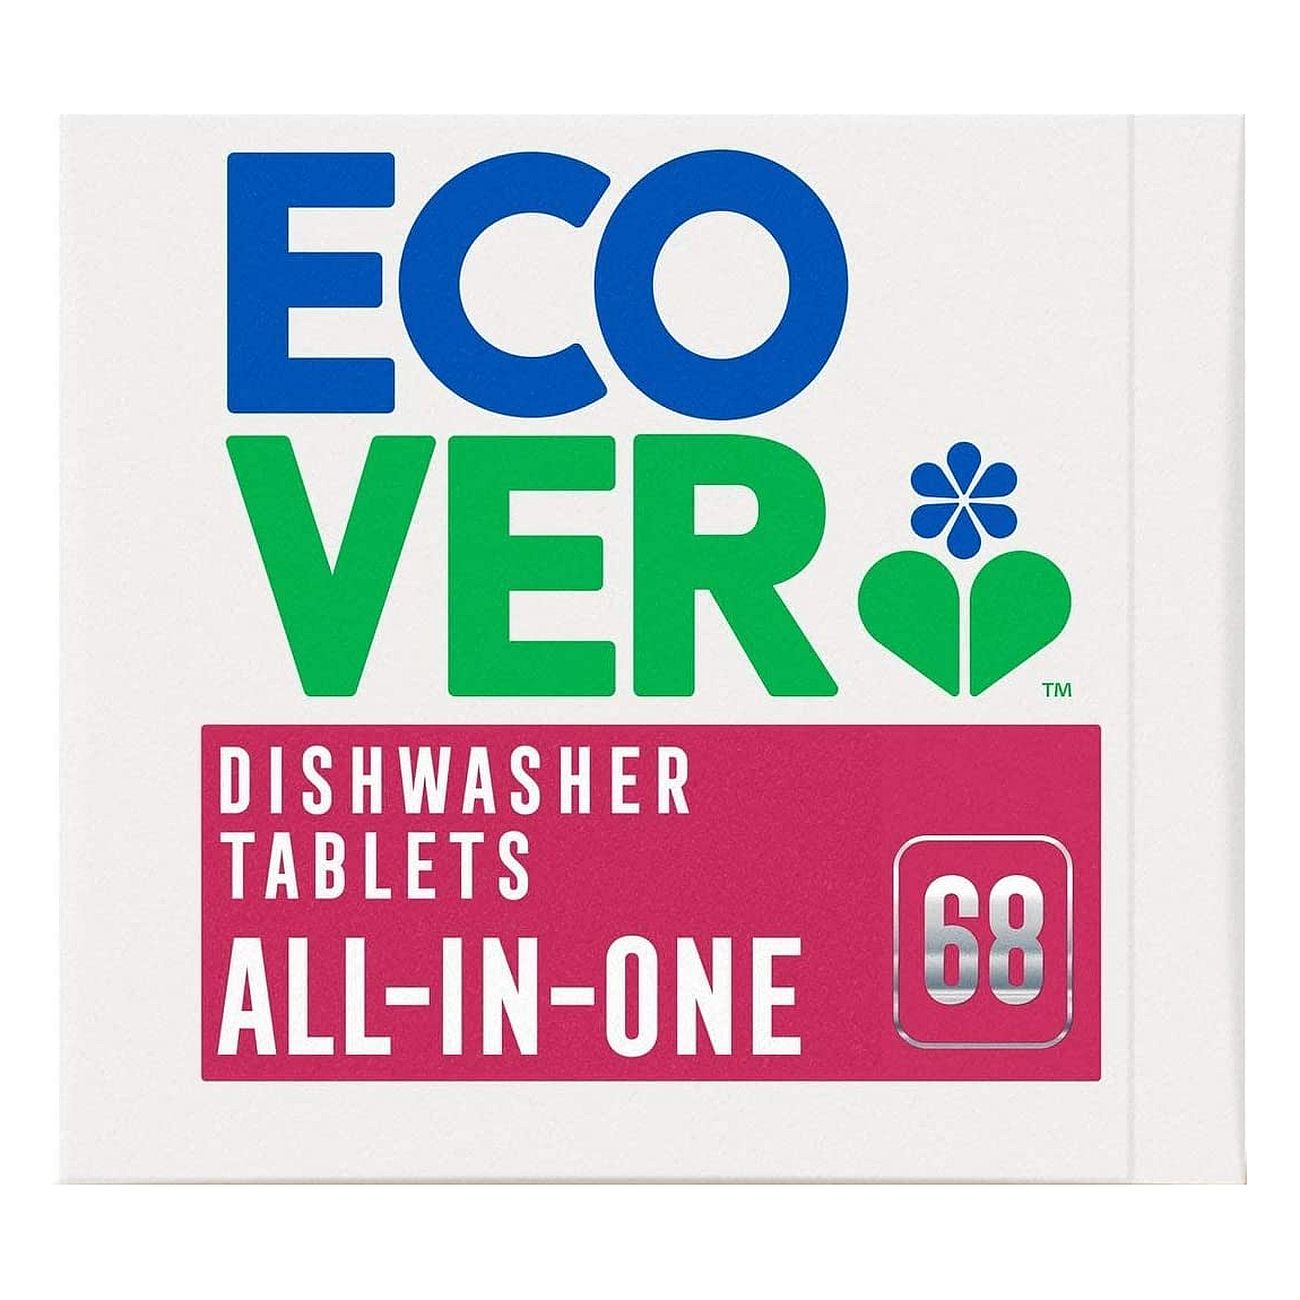 All-in-one Dishwasher 68 Tablets